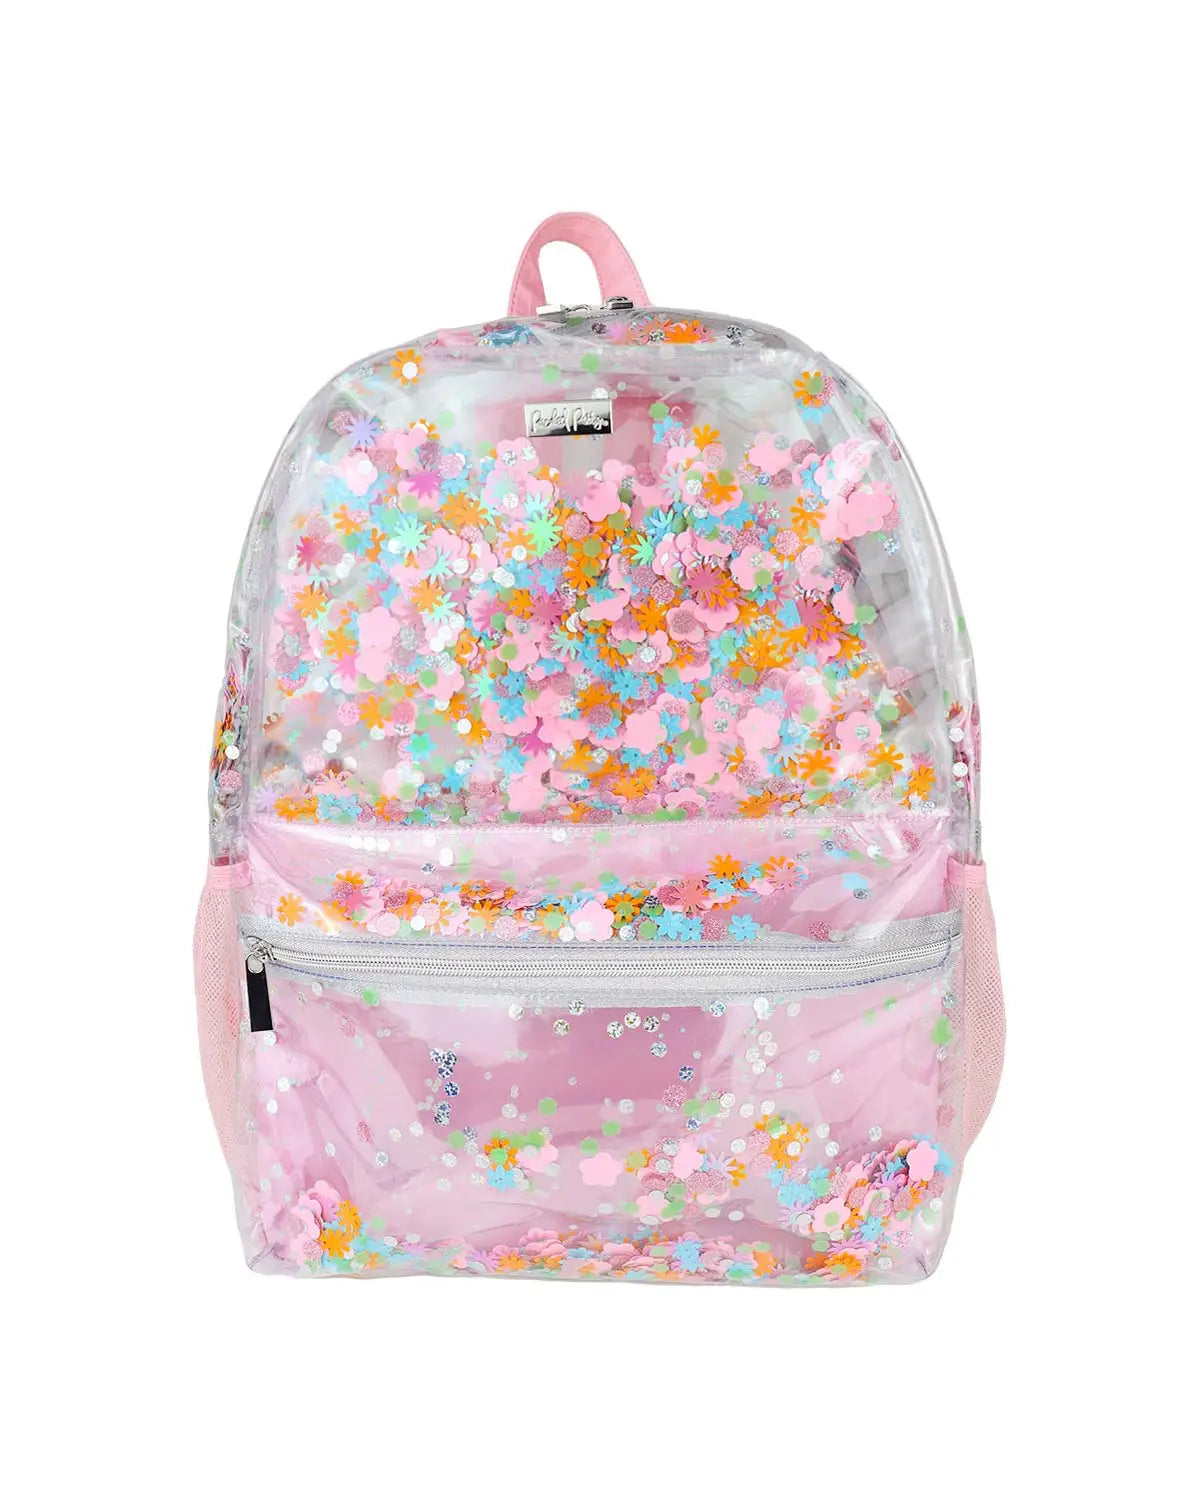 Shop Packed Party Flower Shop Confetti Clear Backpack - Premium Backpack from Packed Party Online now at Spoiled Brat 